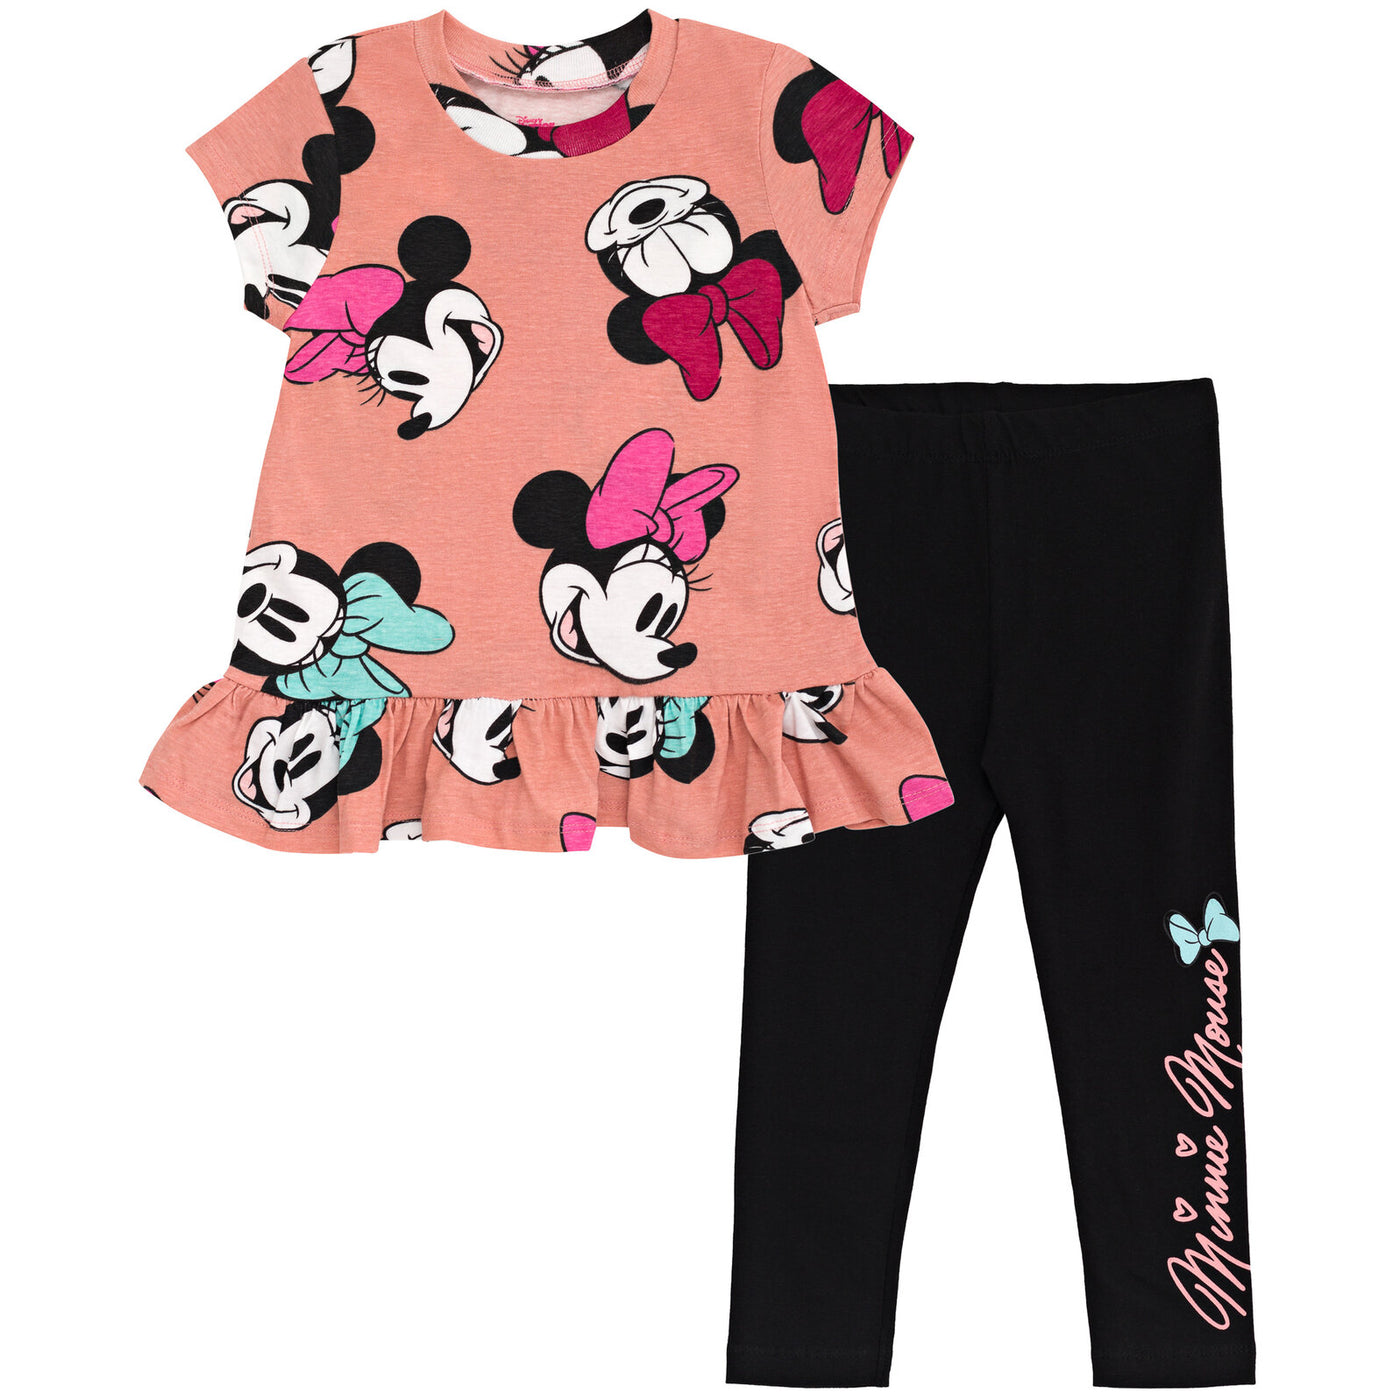 Minnie Mouse Peplum T-Shirt and Leggings Outfit Set